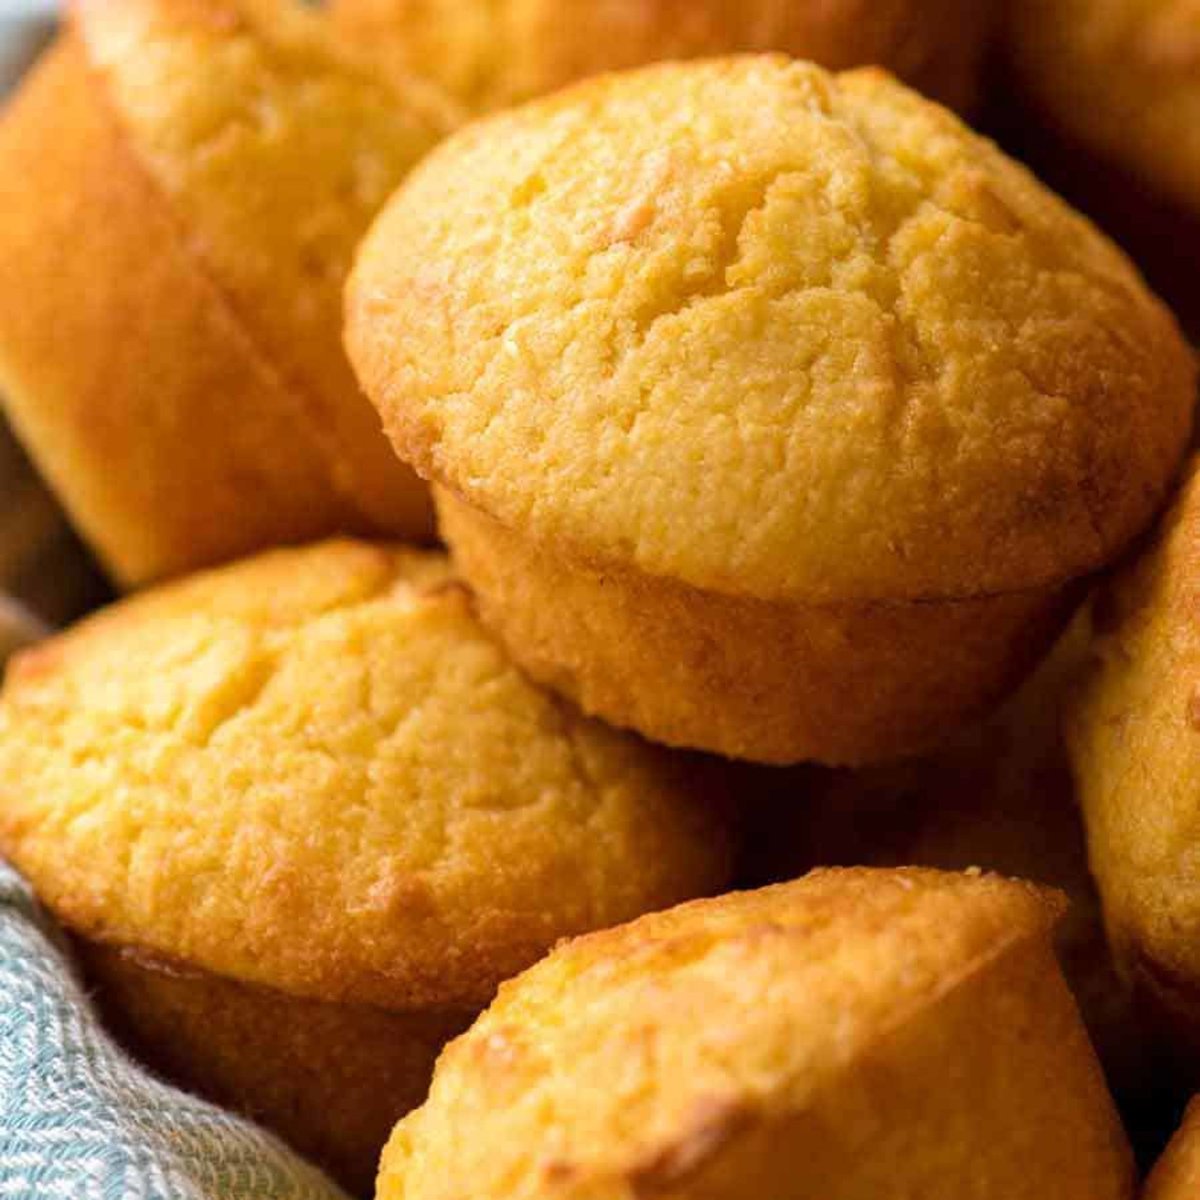 Our corn muffins are basically the corniest of corn muffins in Southie! 
broadwayspastry.com
.
.
.
#cornmuffins #muffins #cupcakes #baking #muffin #cake #homemade #dessert #sweet #coffee #muffintime #glutenfree #cornmuffin #southie #southboston #bostonfoodies #boston